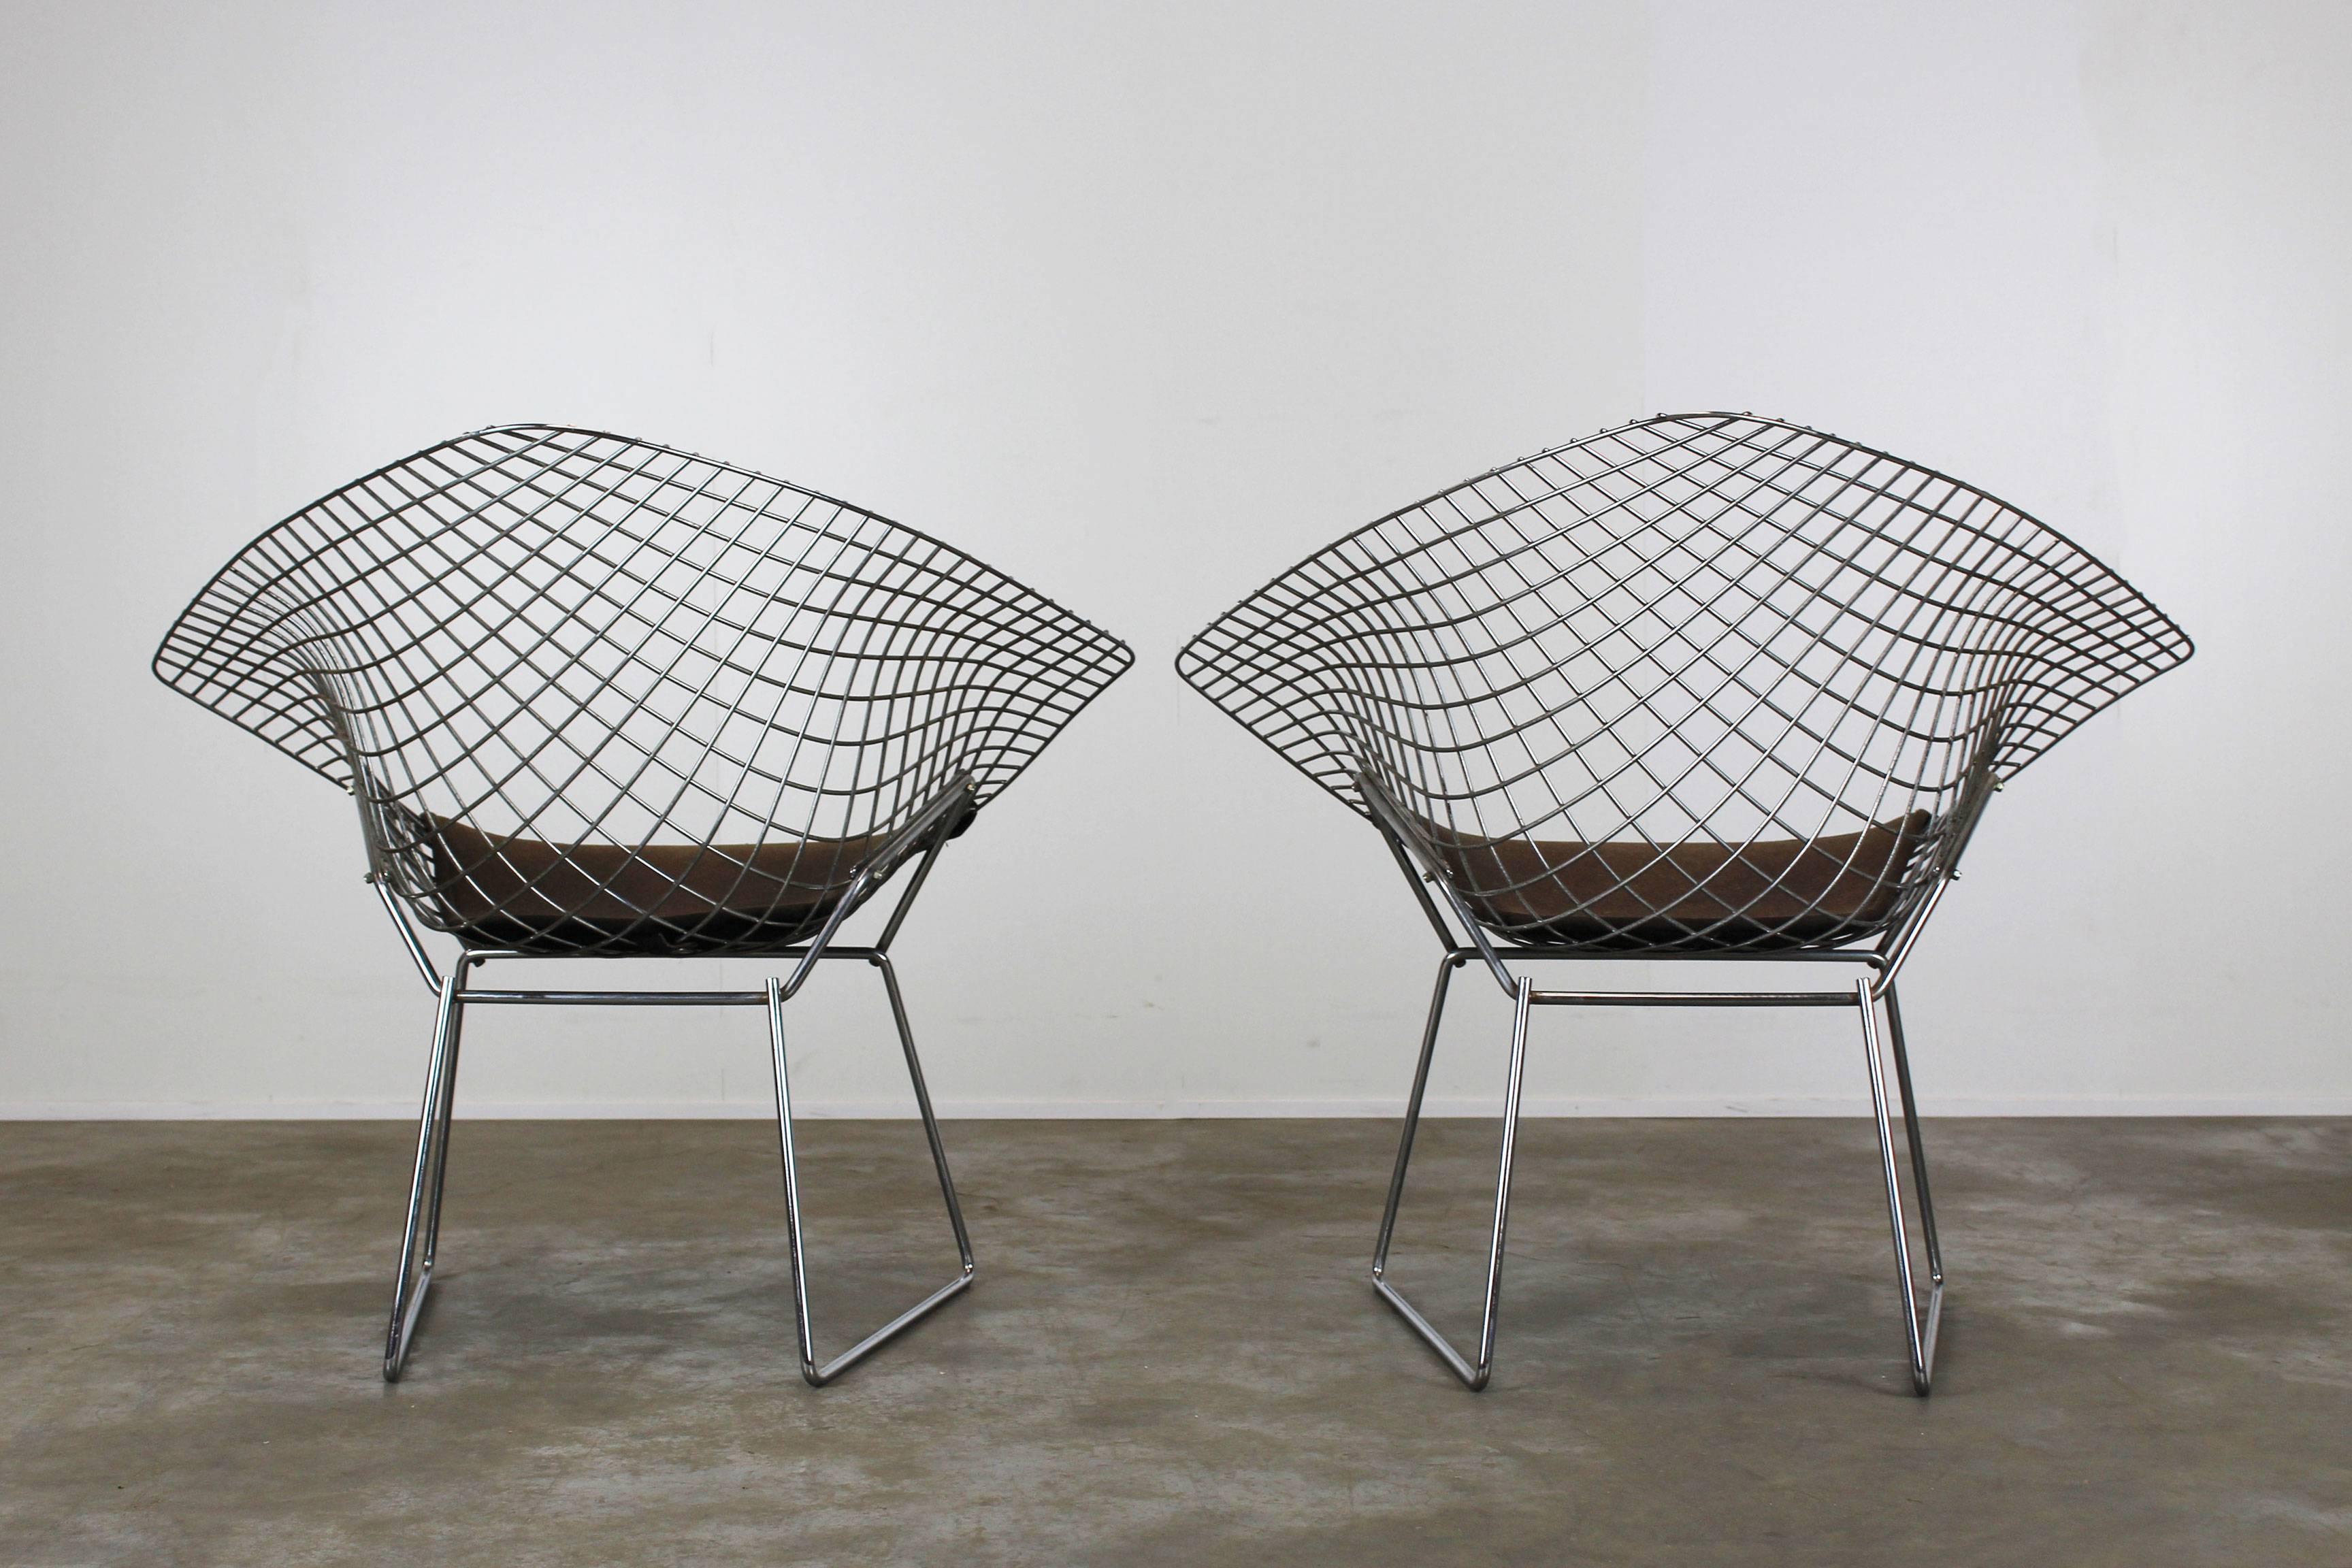 Dutch Set of Two Chrome Diamond Chairs by Harry Bertoia for Knoll, 1970, Grey